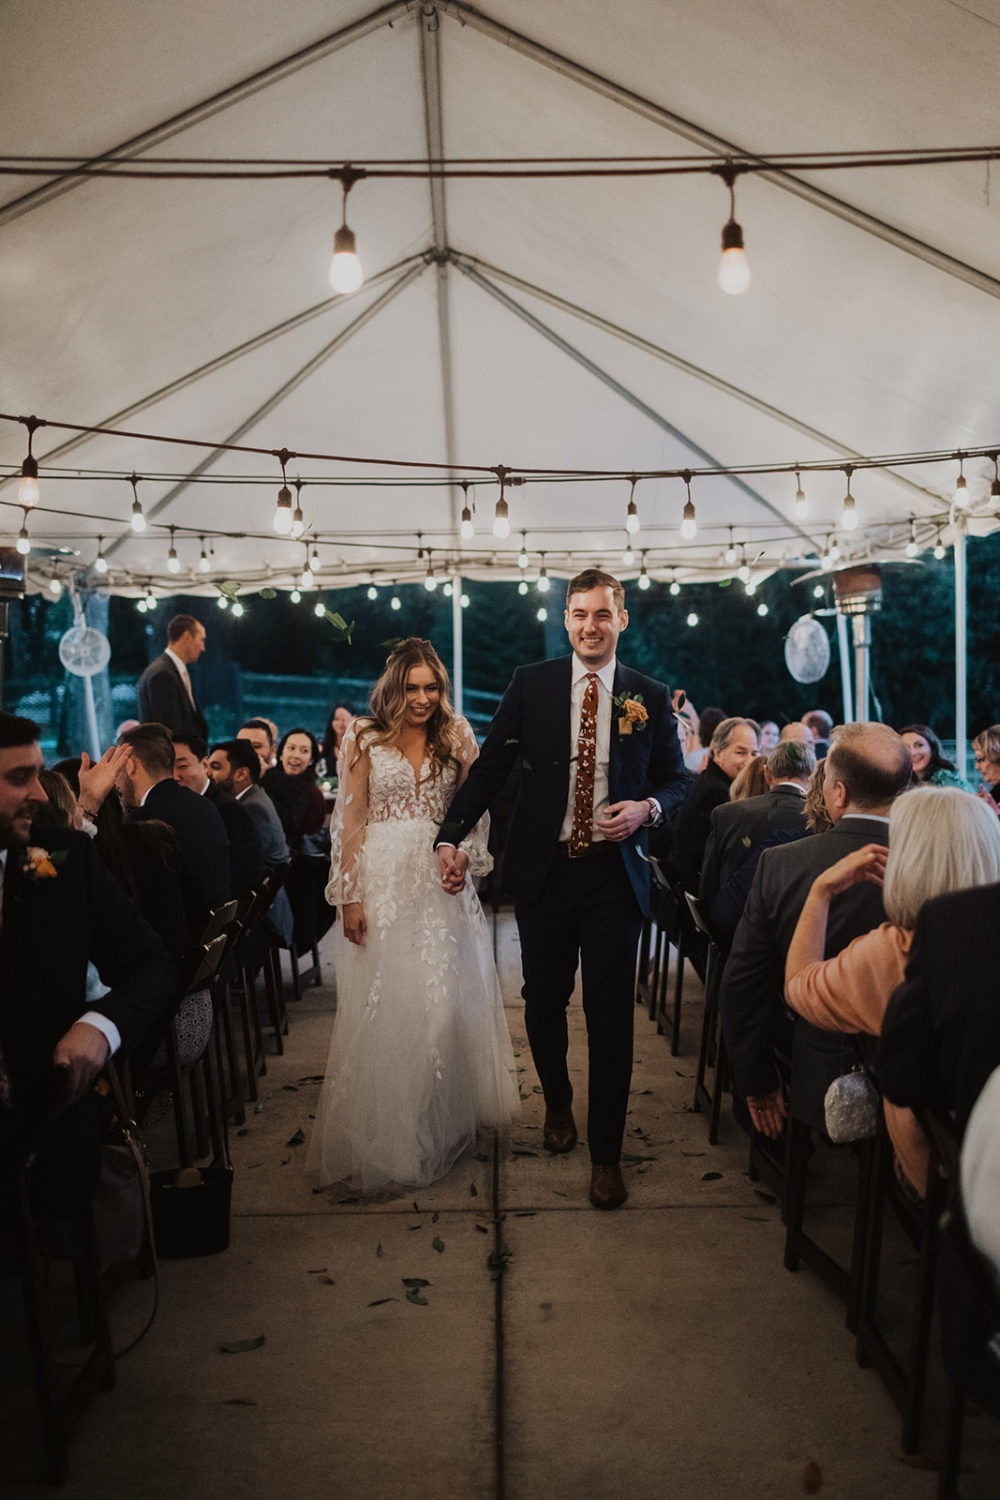 Couple walks into reception tent lit with twinkle lights